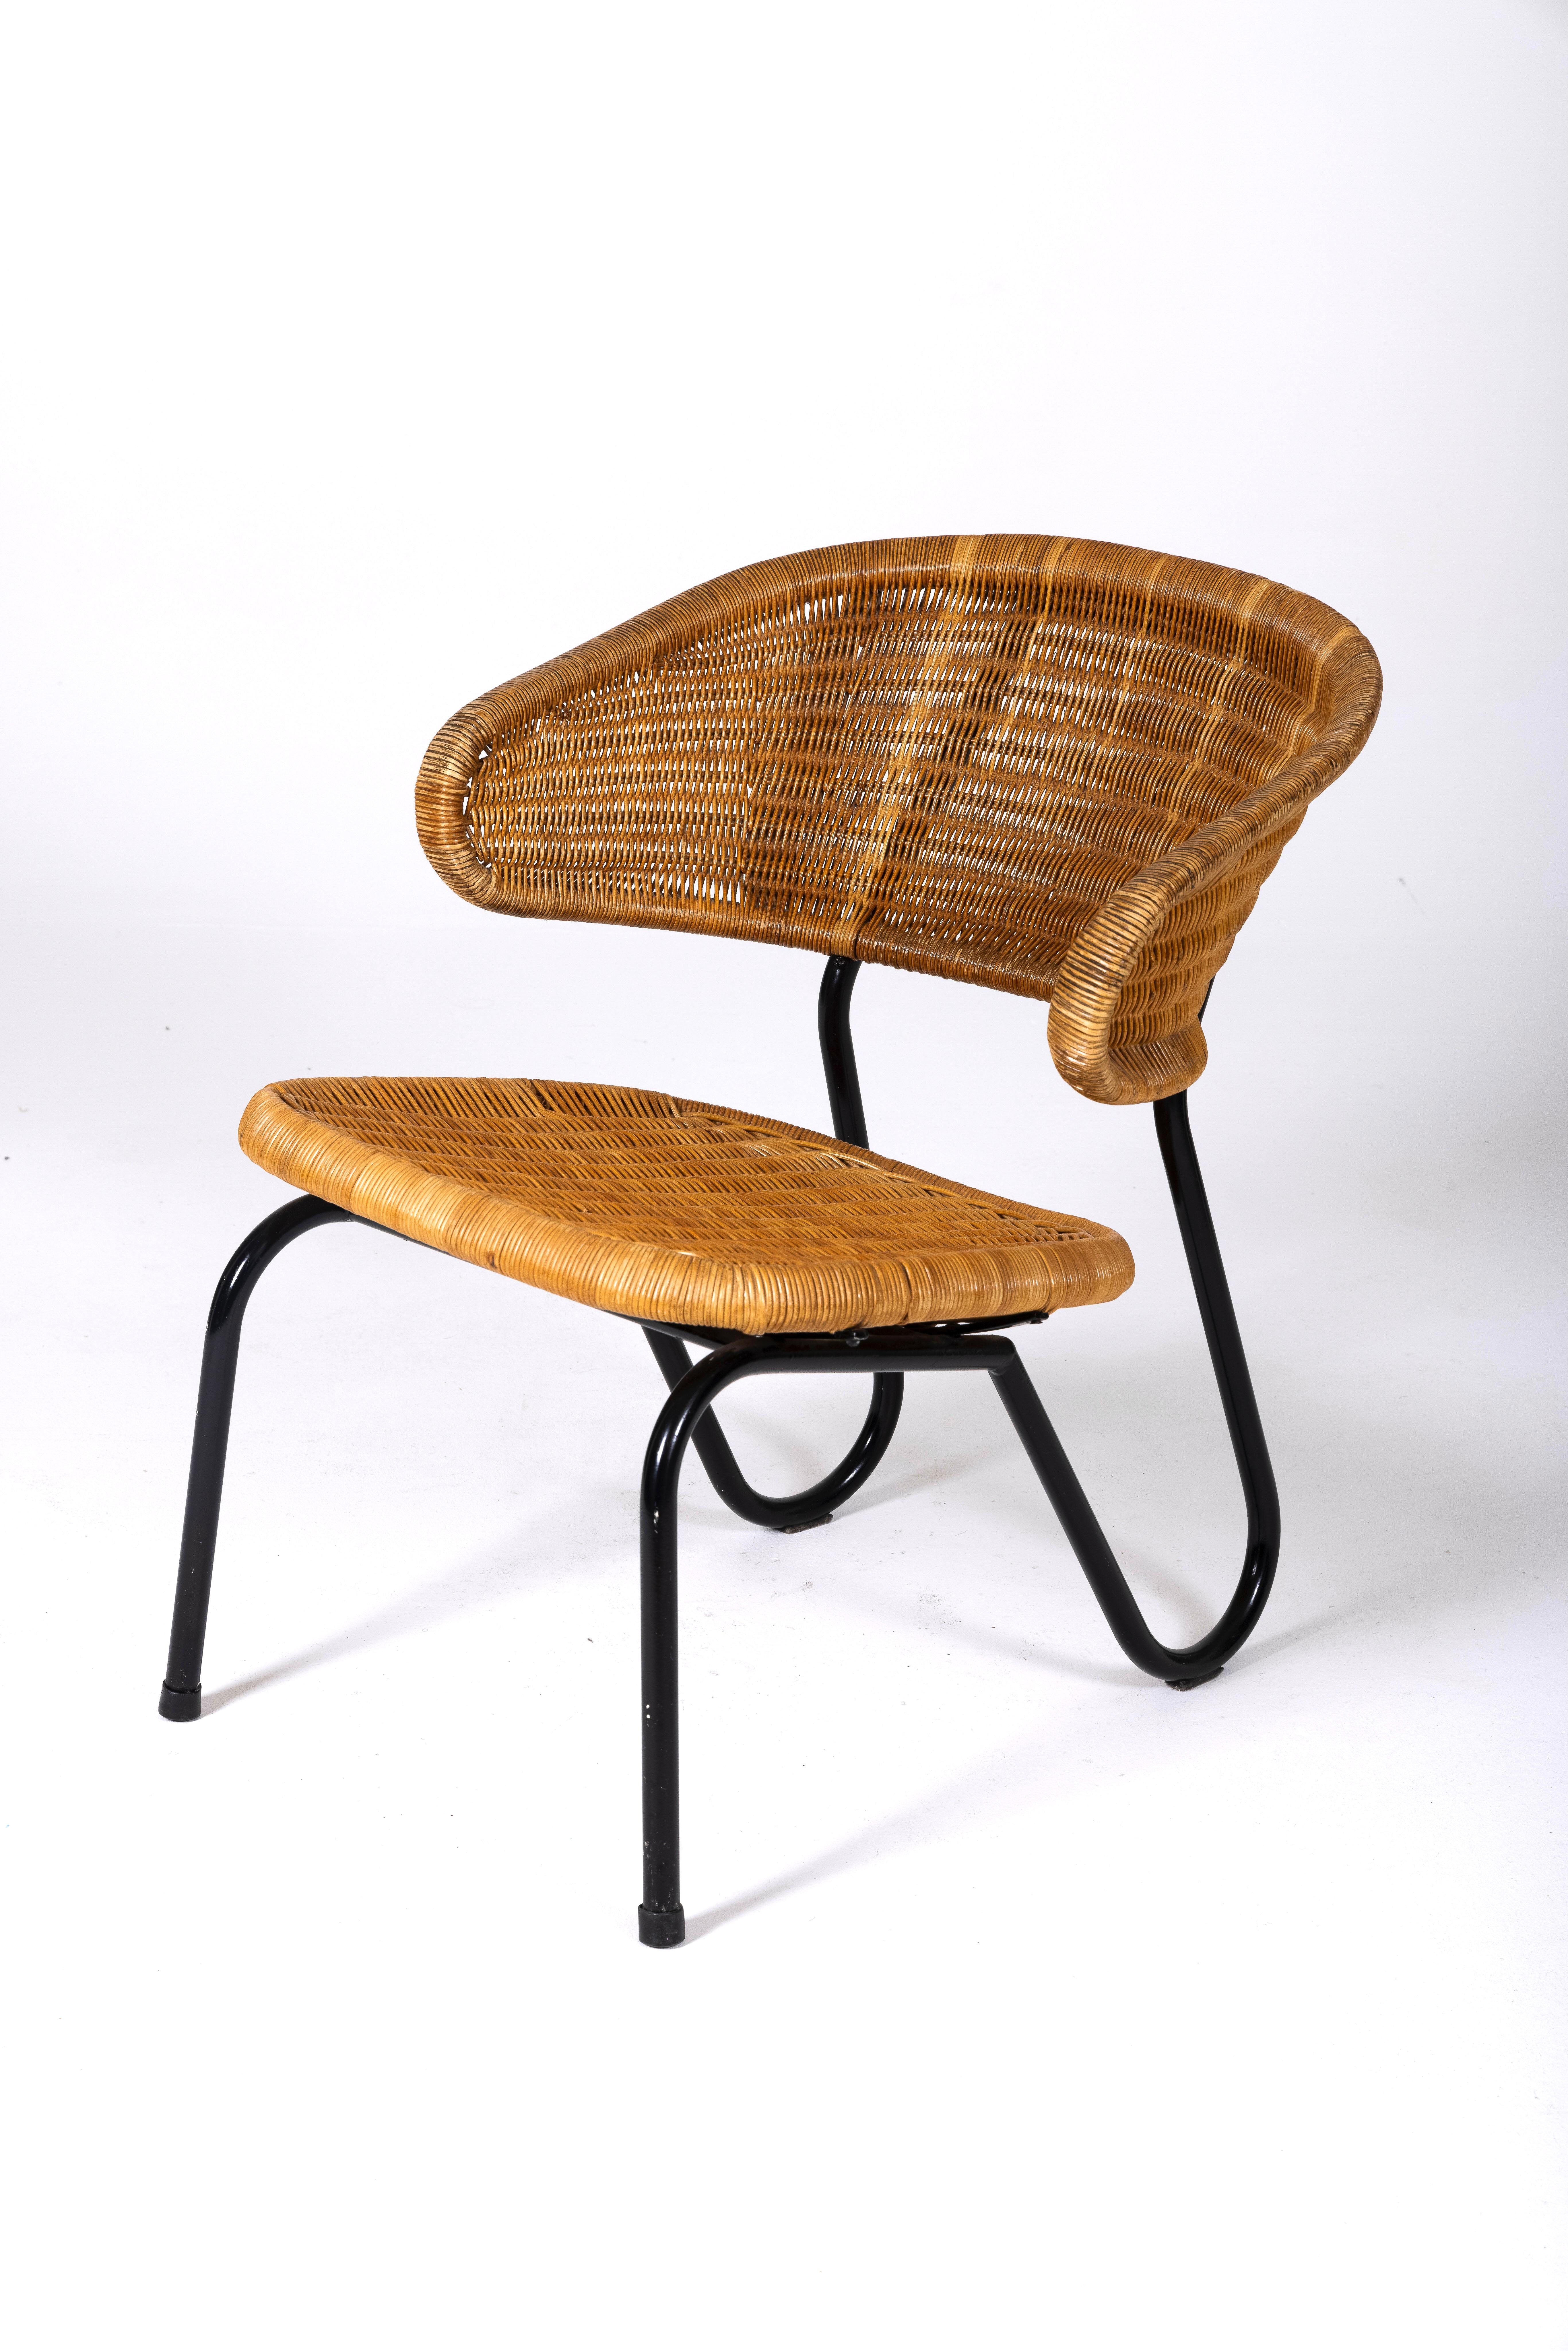 Dutch vintage armchair designed by the designer Dirk Van Sliedregt for Gebr. Jonkers, 1950s. The seat is entirely made of wicker and rests on a black metal base, giving it a modern style. In very good overall condition.

DV165